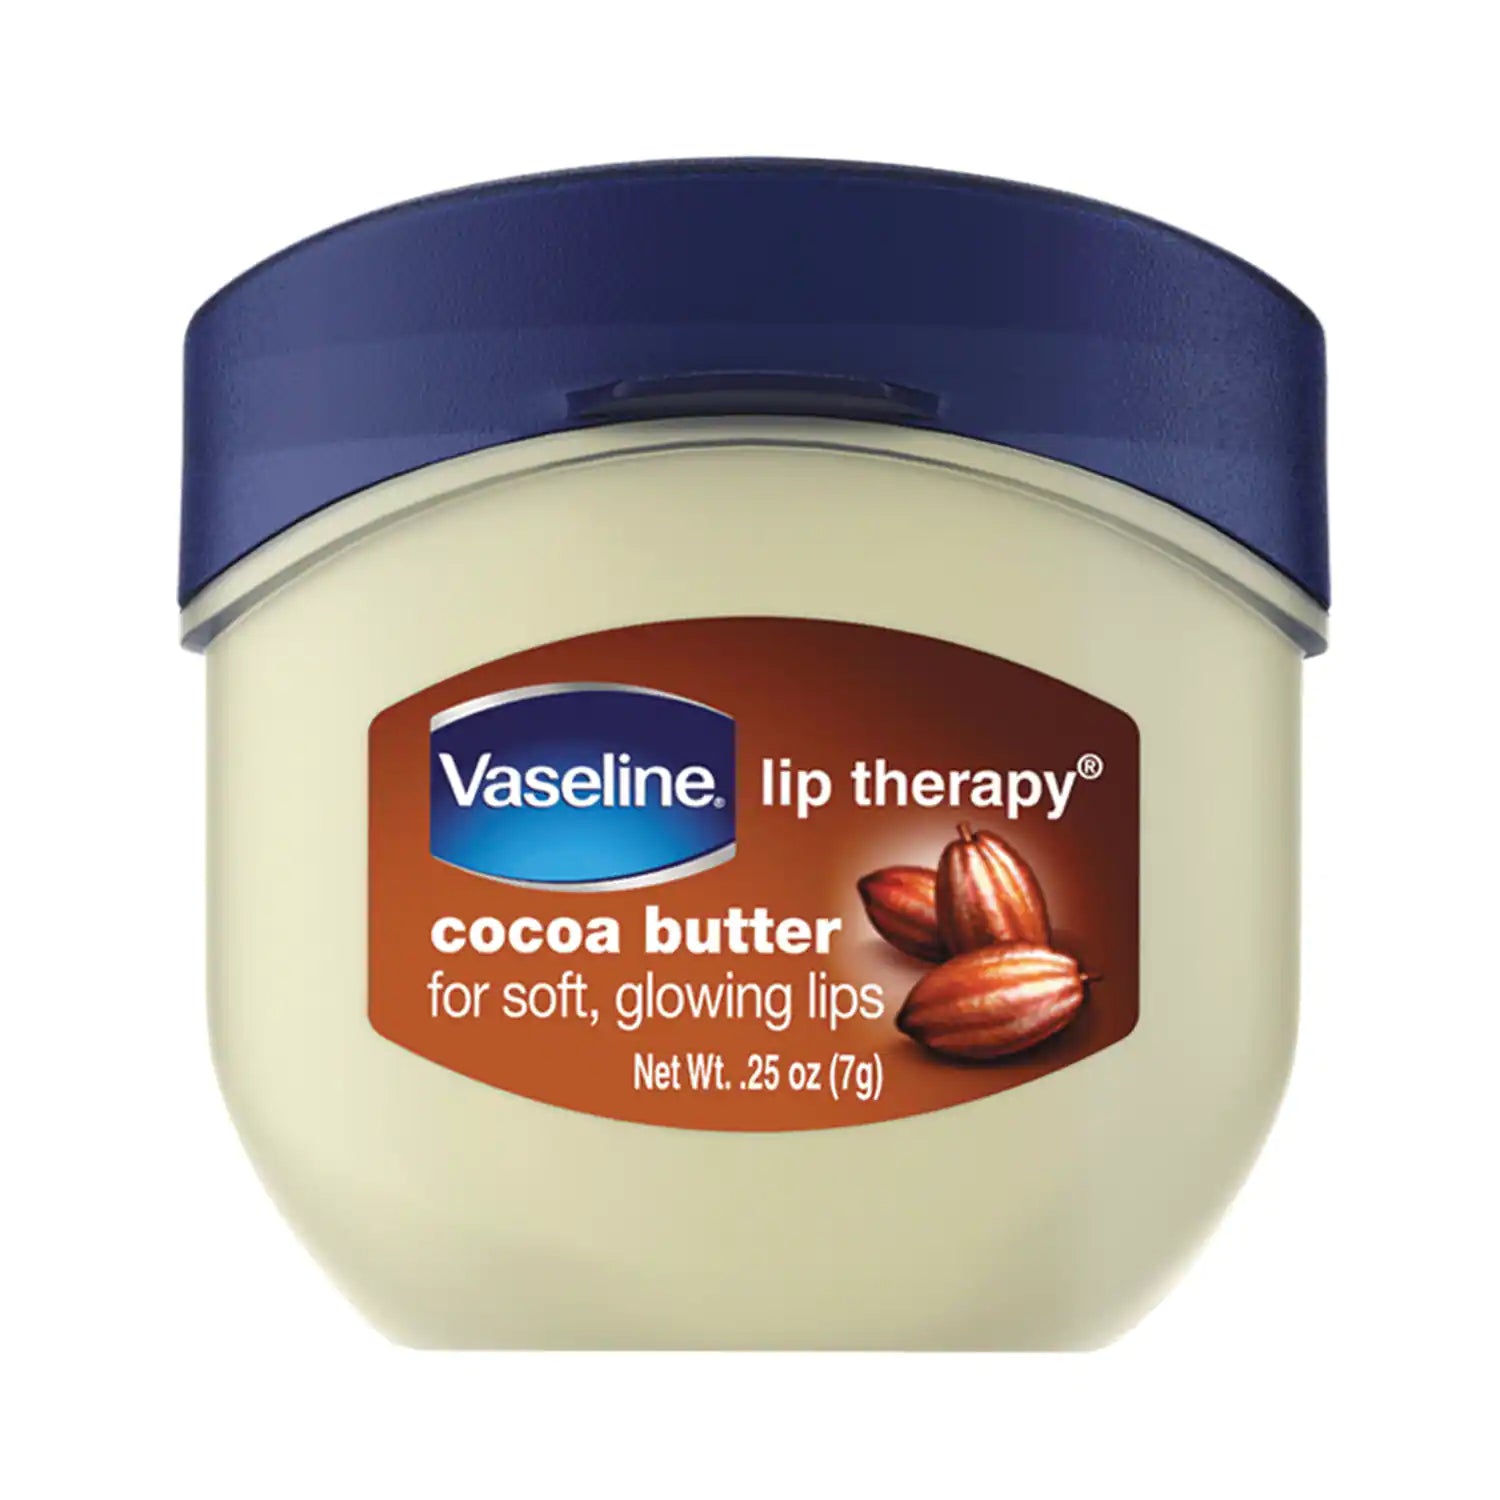 Vaseline Cocoa Butter Lip Therapy 7g - DoctorOnCall Farmasi Online